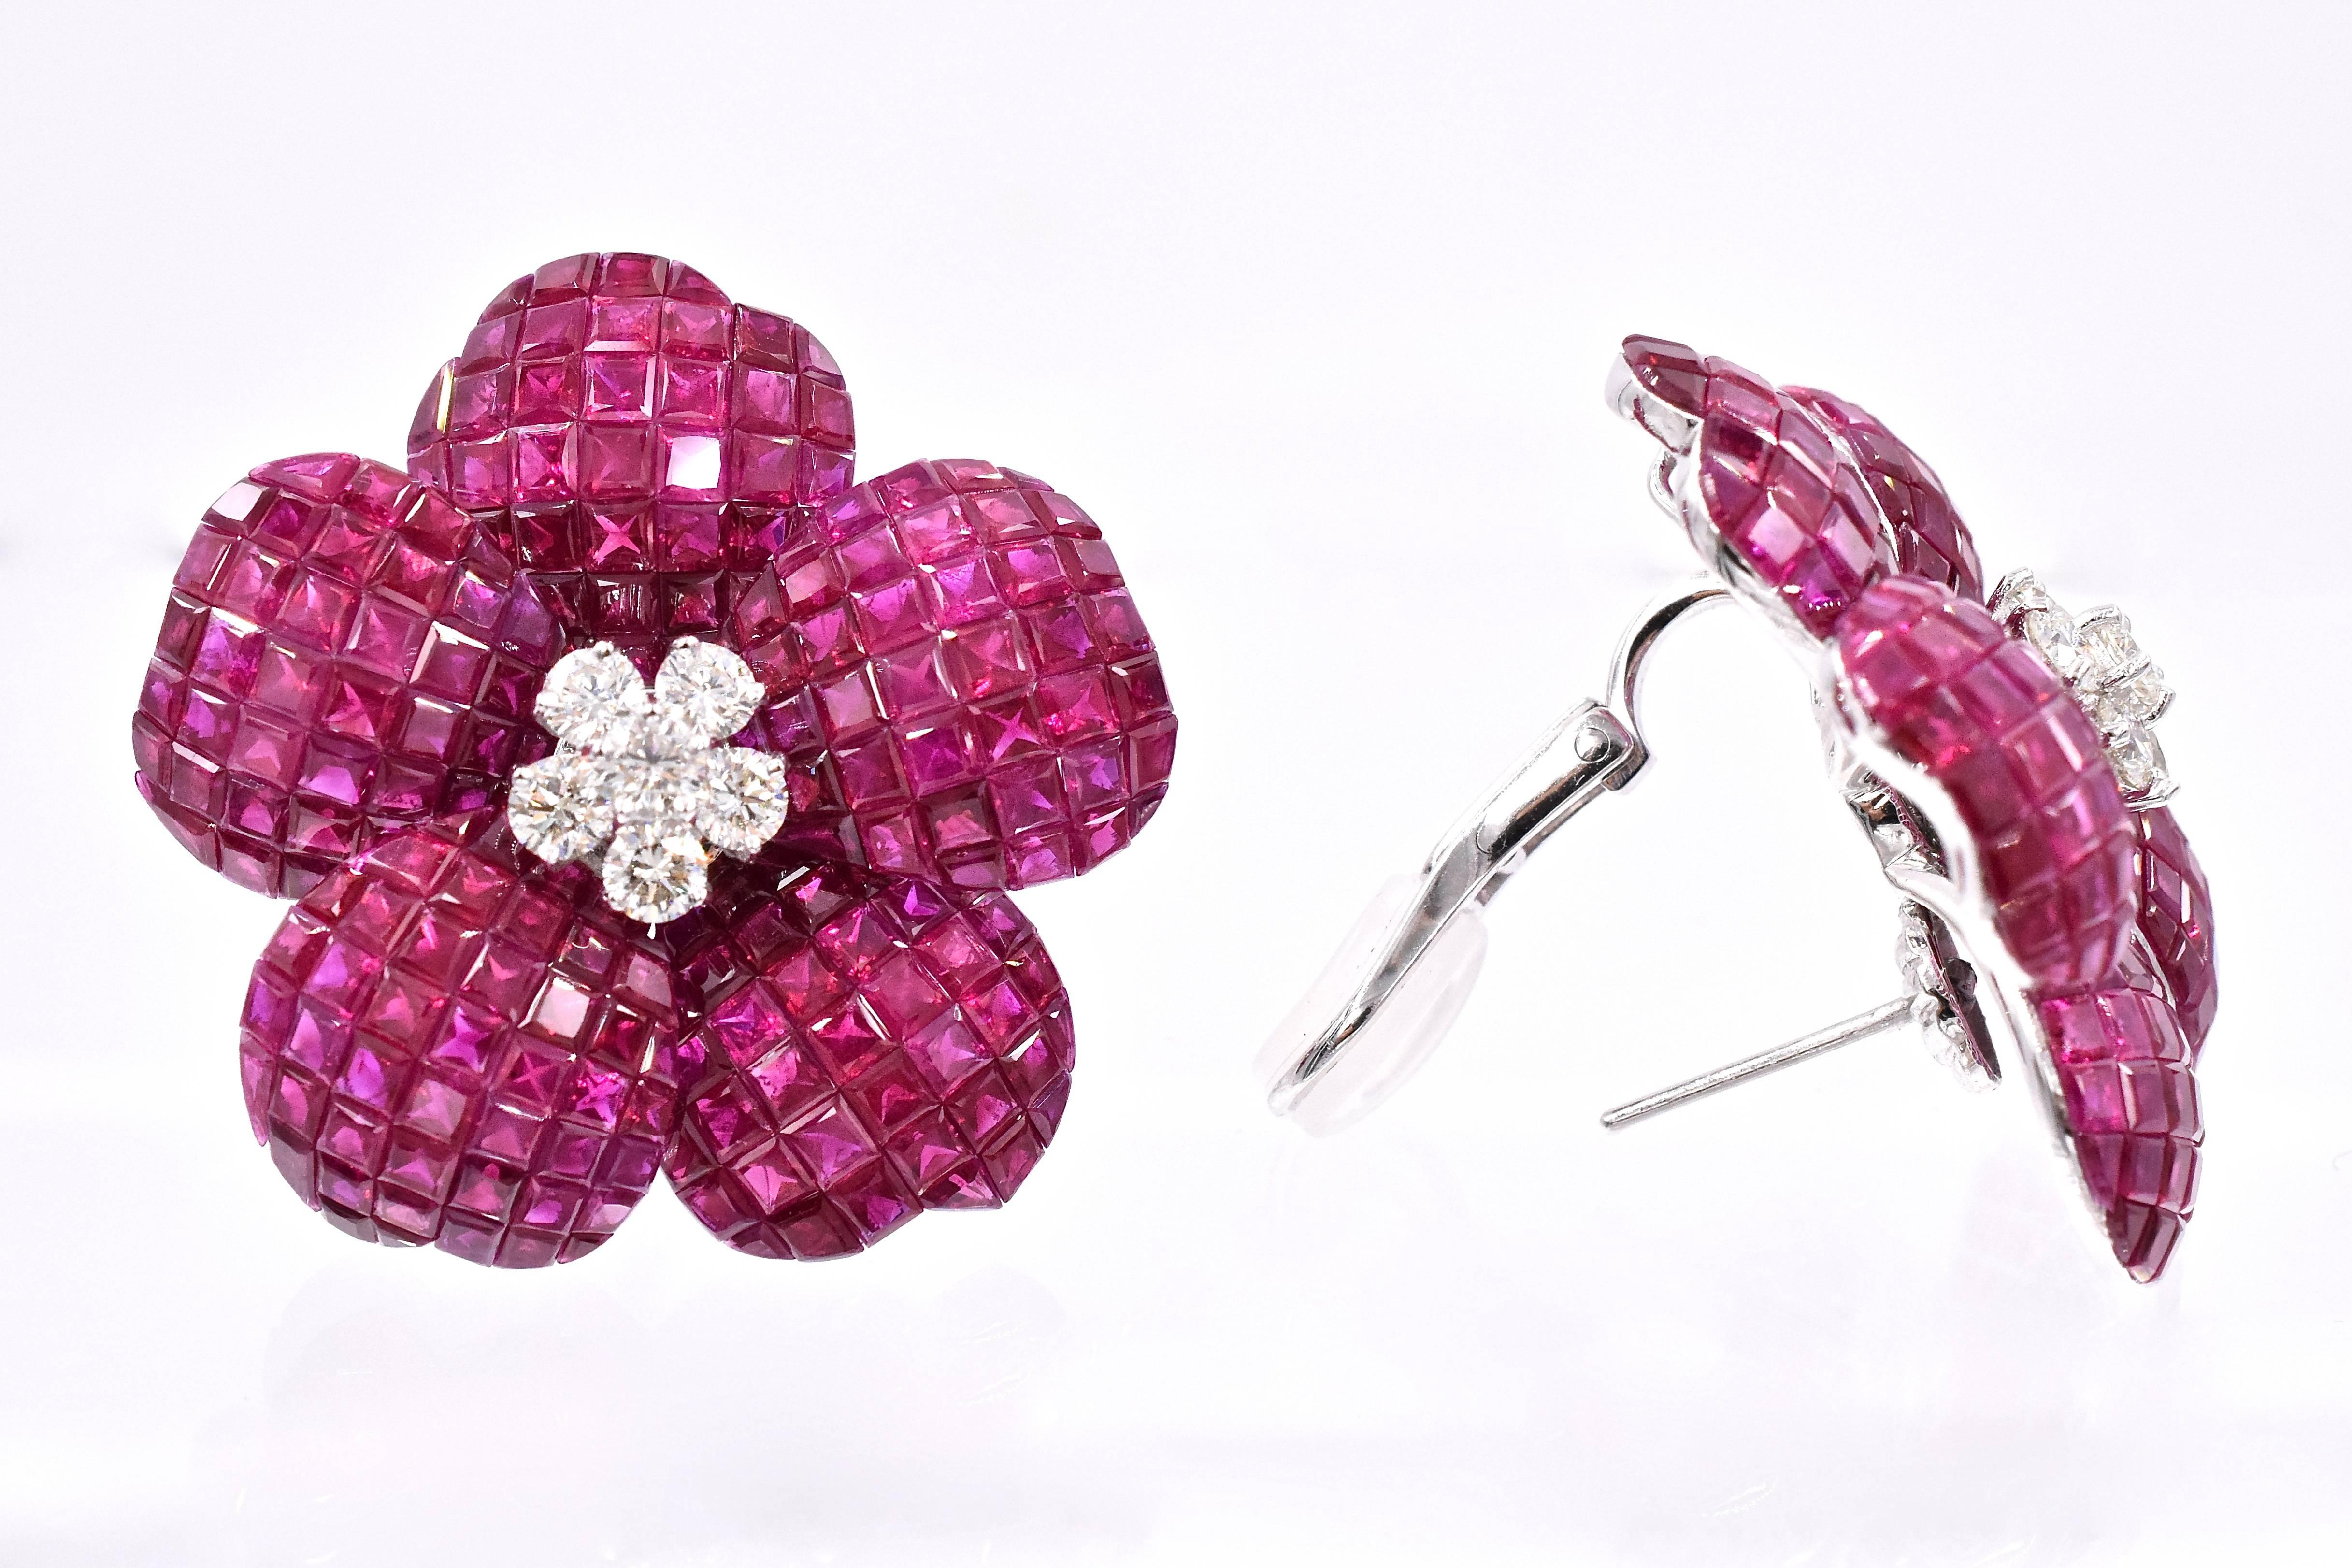 Classic  ruby and diamond flower earrings. 
Five mystery set ruby flower petals centered with 5 diamonds.
Estimated total ruby weight is 46.88 carats and total diamond weight is 1.5 carats
18 K gold with with omega lock.

